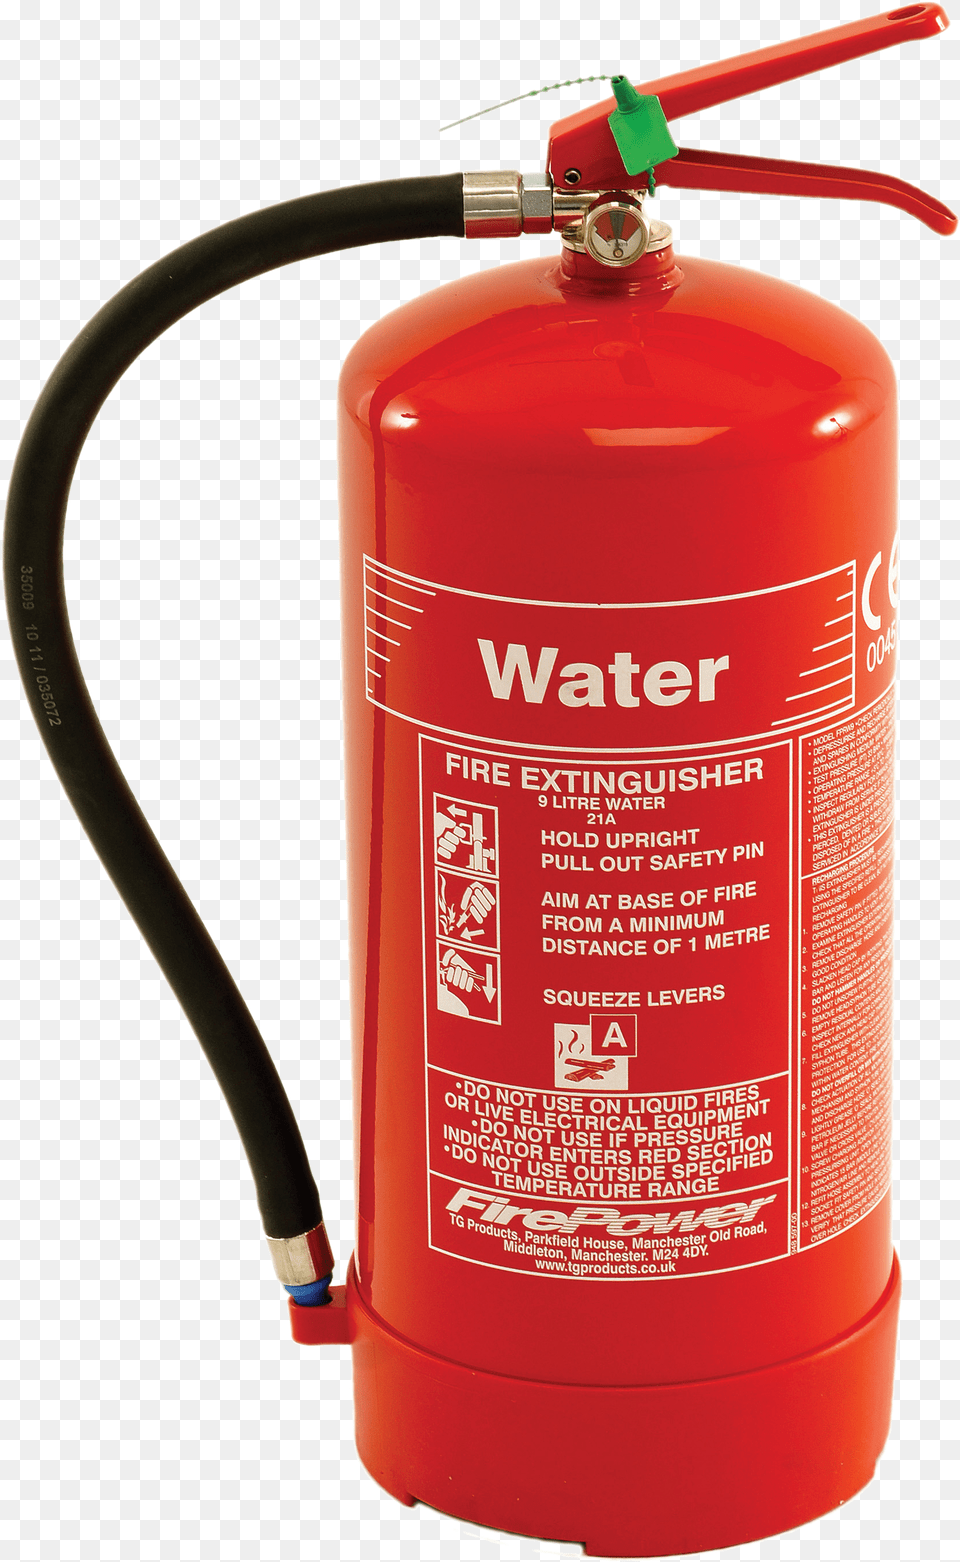 Water Fire Extinguisher, Cylinder, Smoke Pipe Png Image